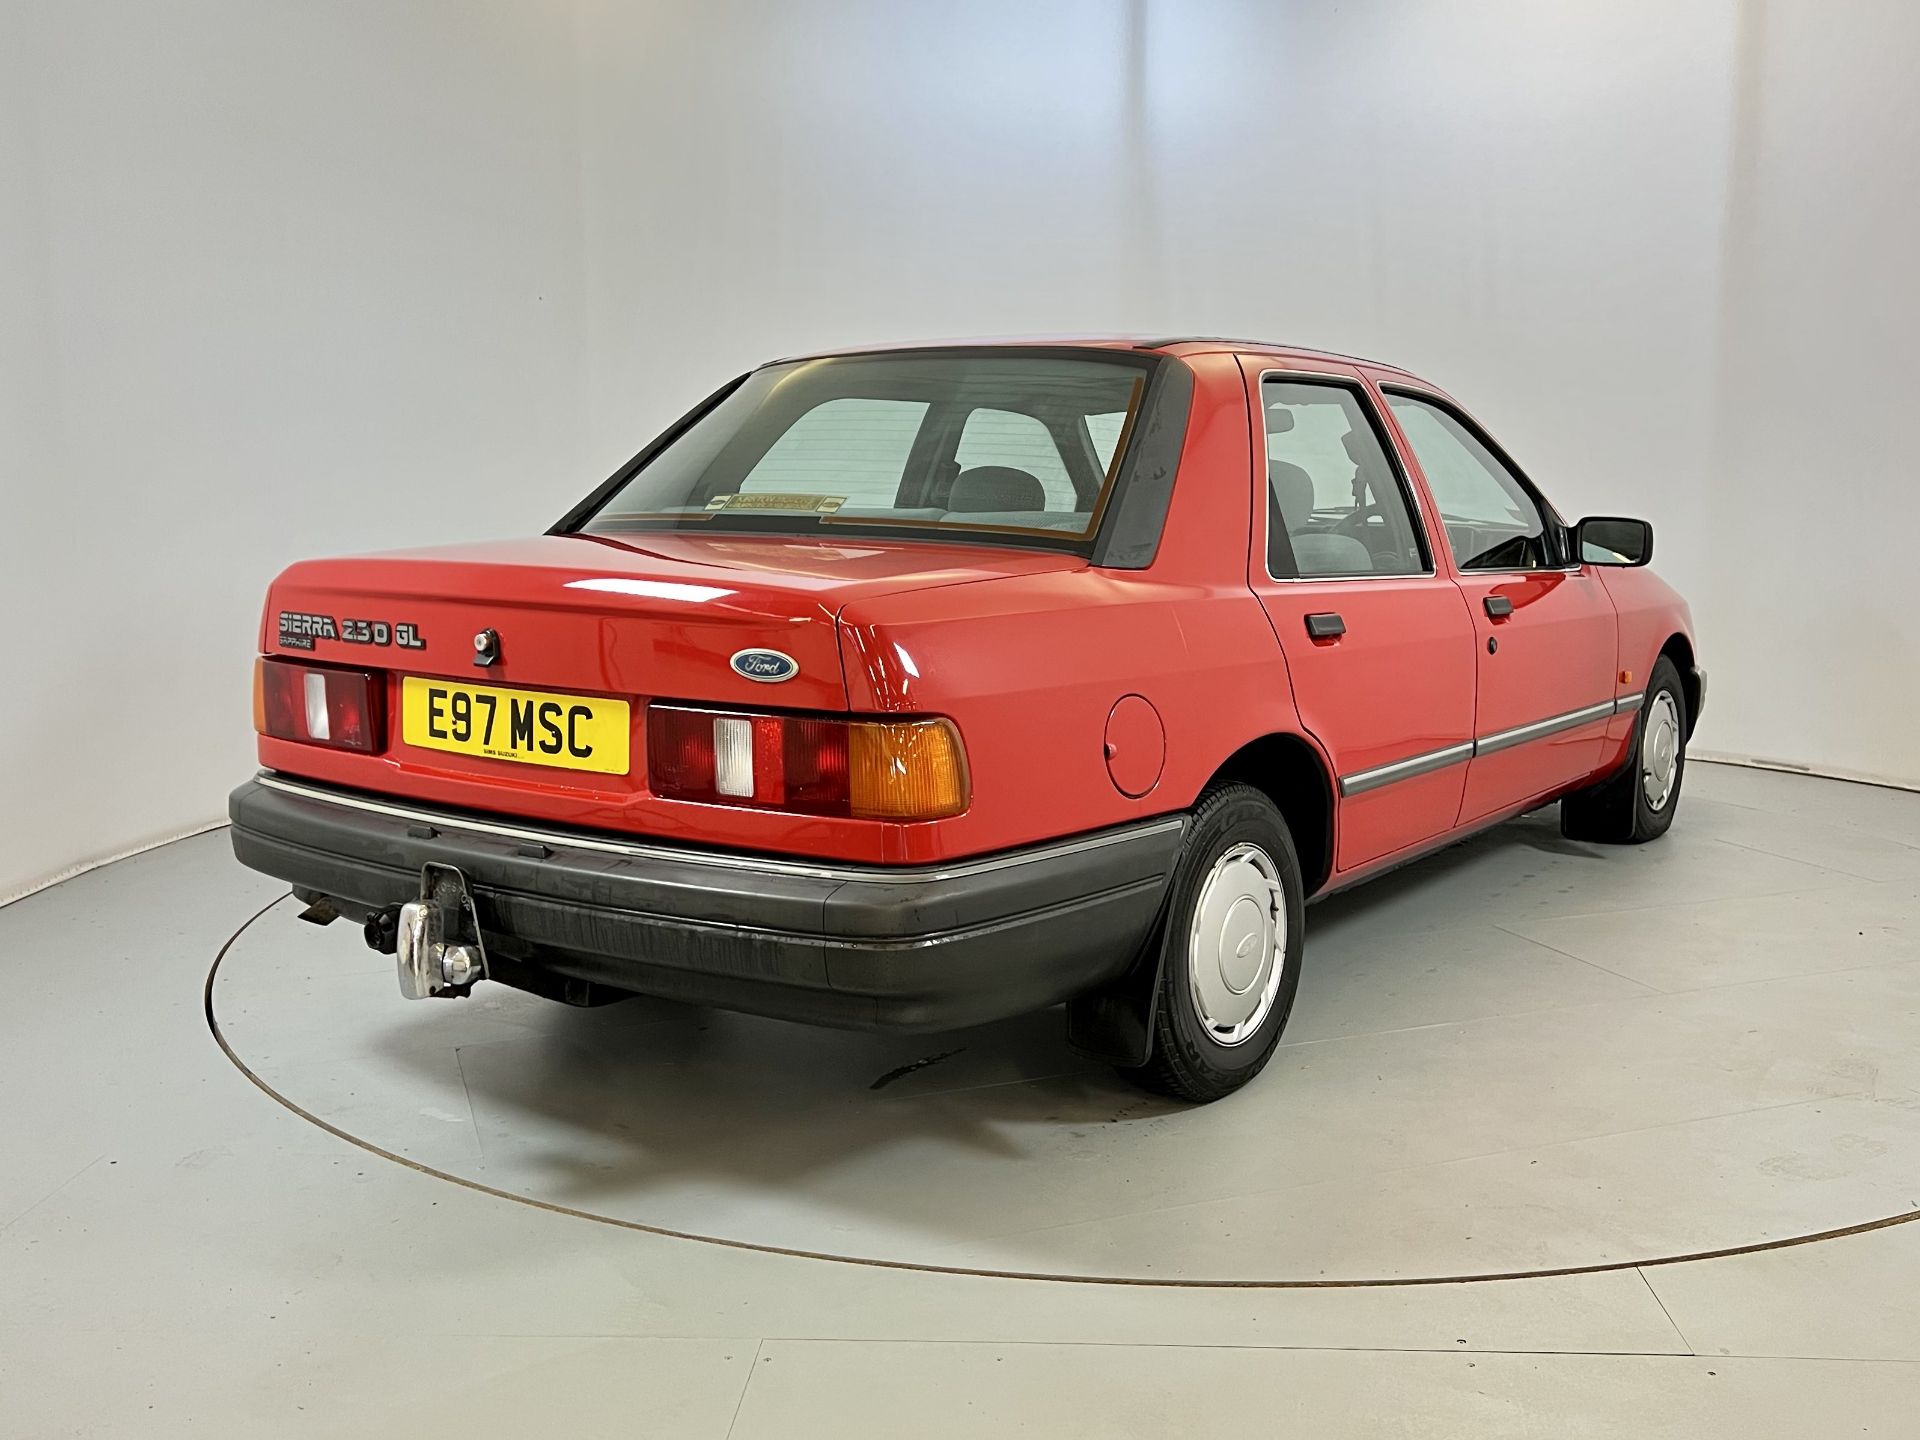 Ford Sierra Sapphire - Image 9 of 34